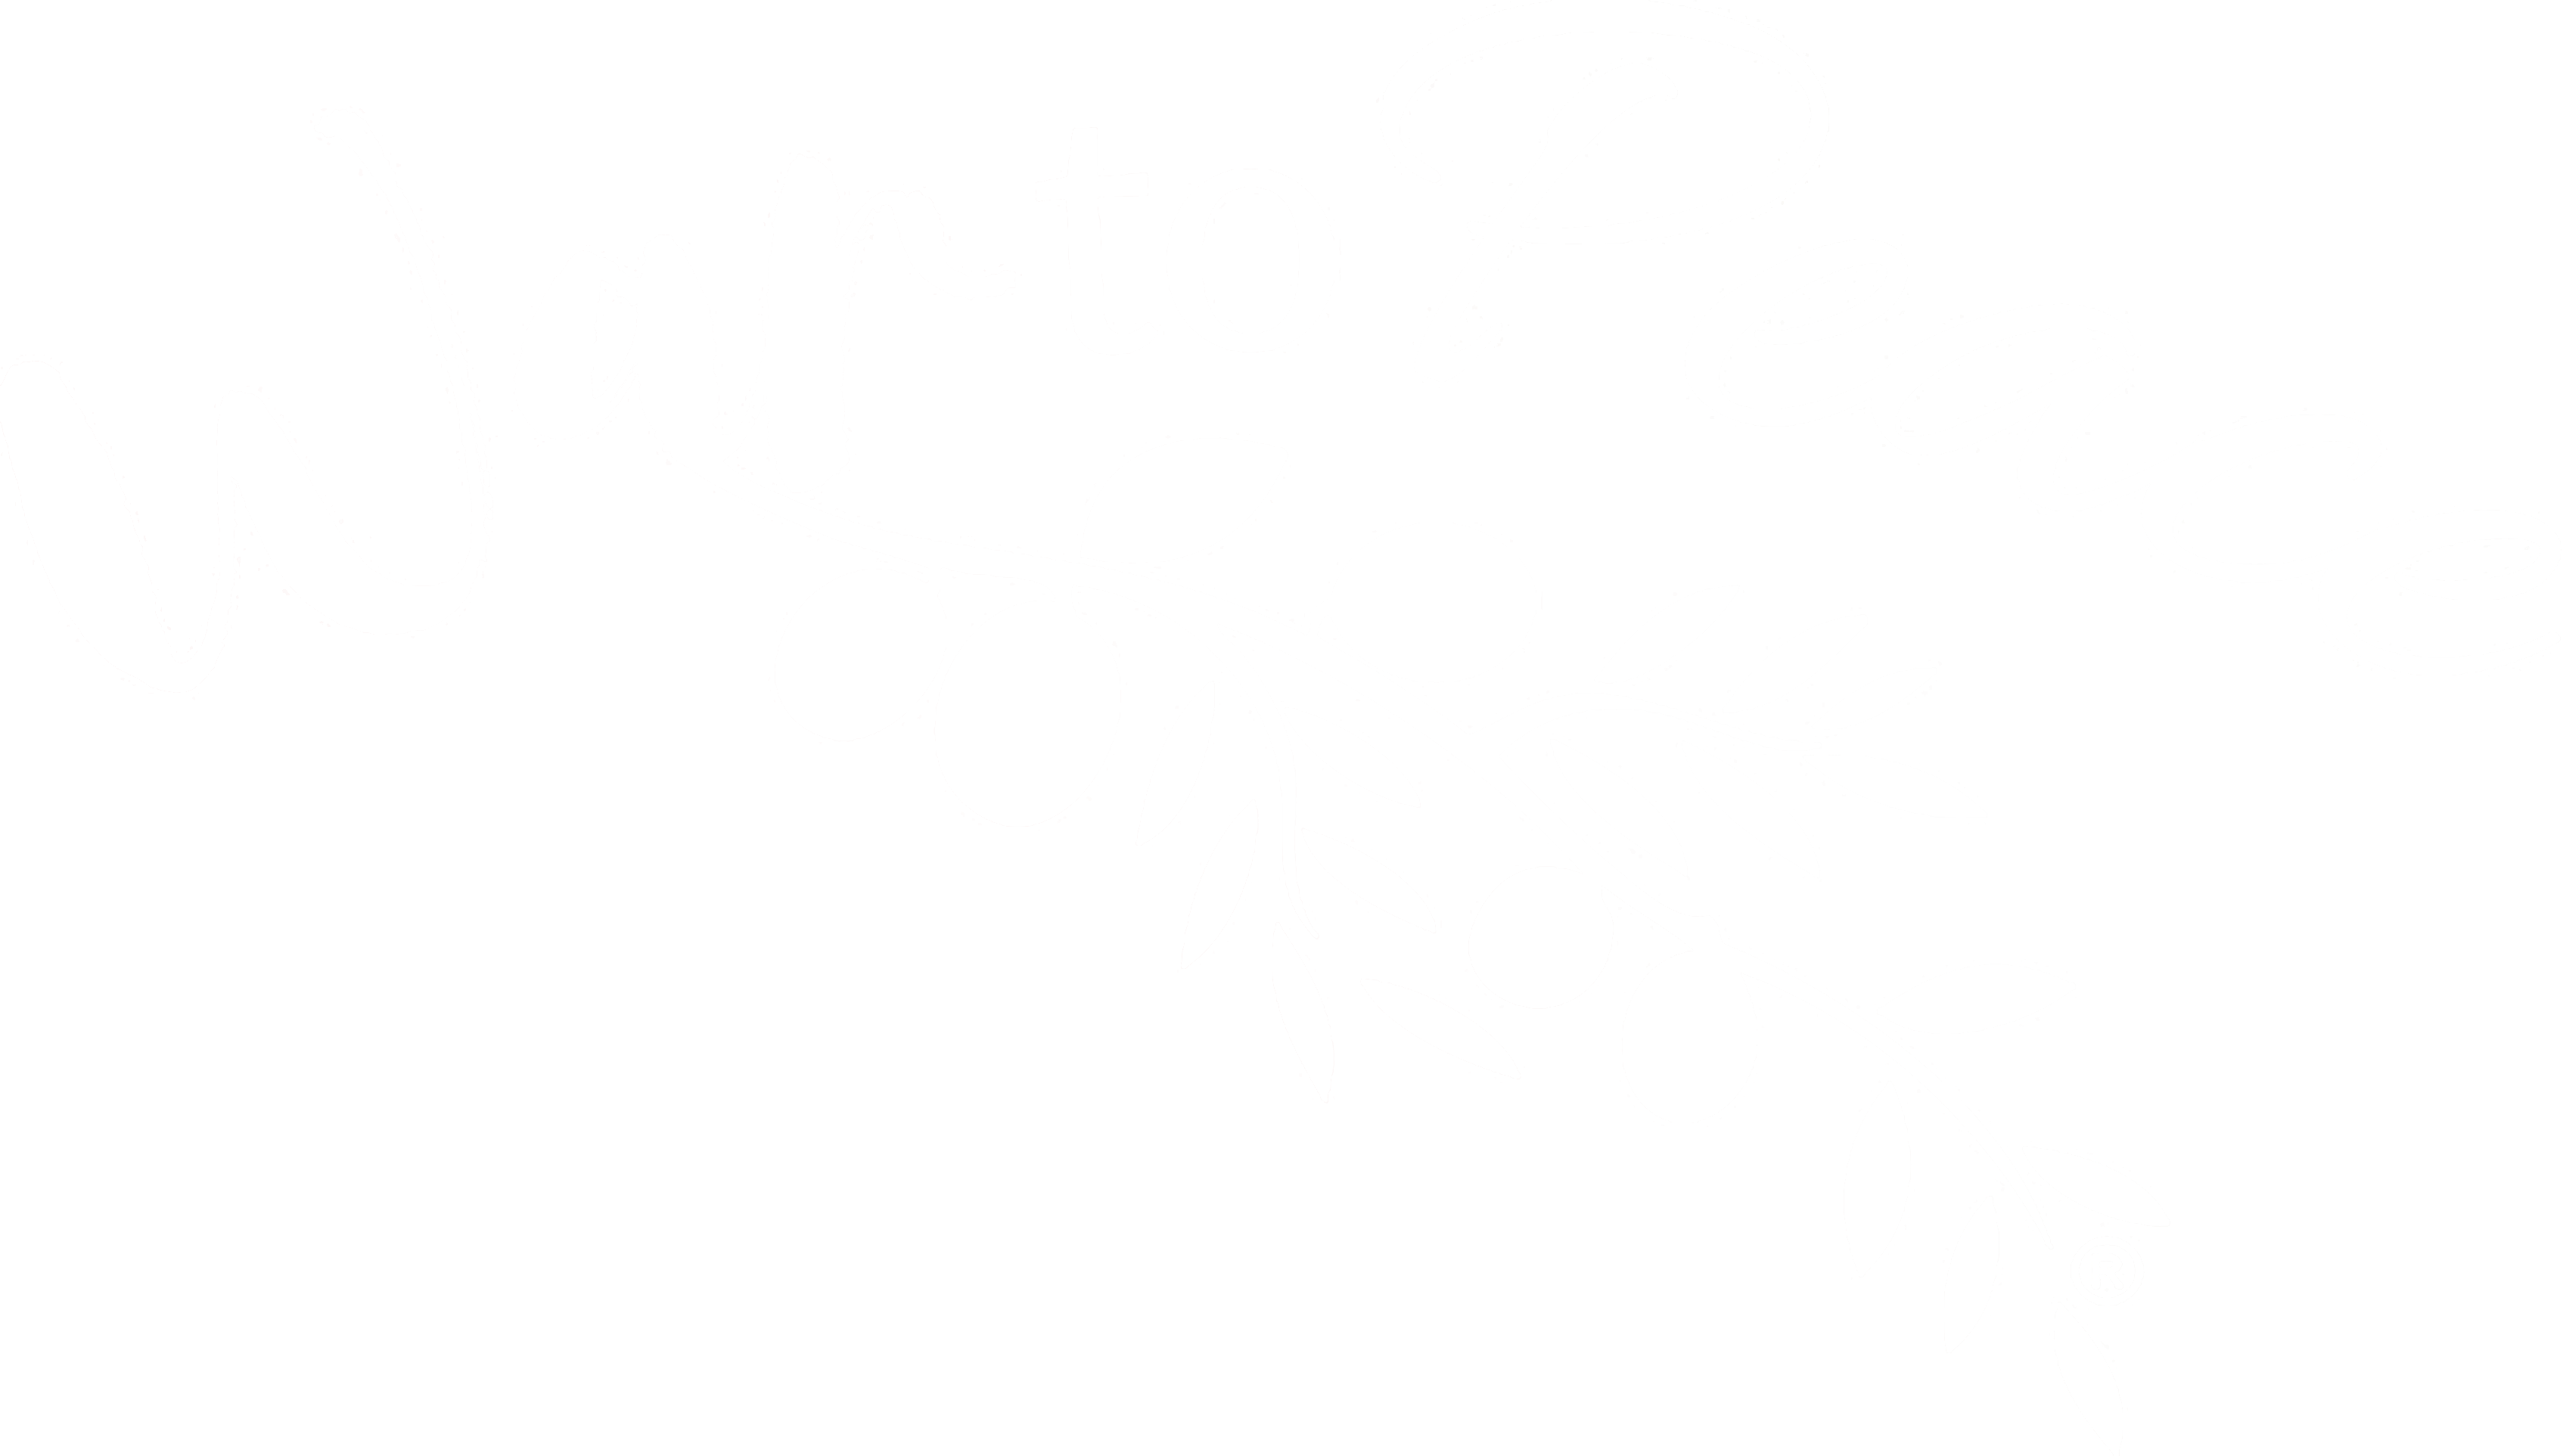 War to Peace® logo showing an olive branch extending from War to Peace.